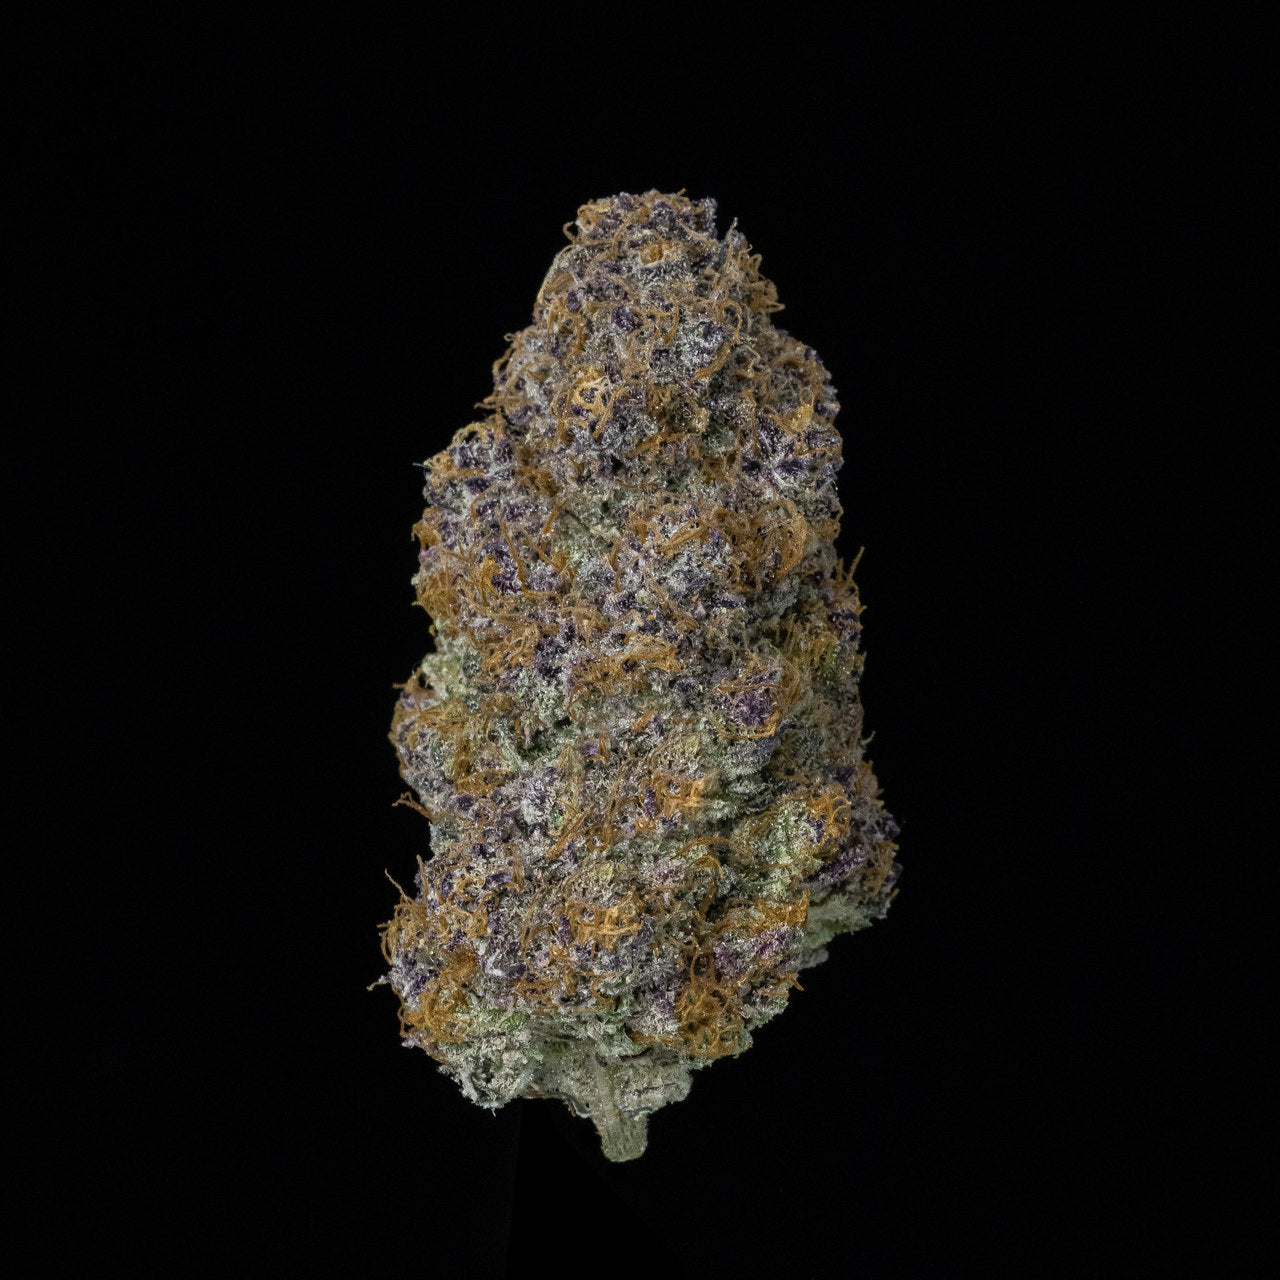 A nug of cannabis flower from the Blue Cookies weed strain stands against a black background.